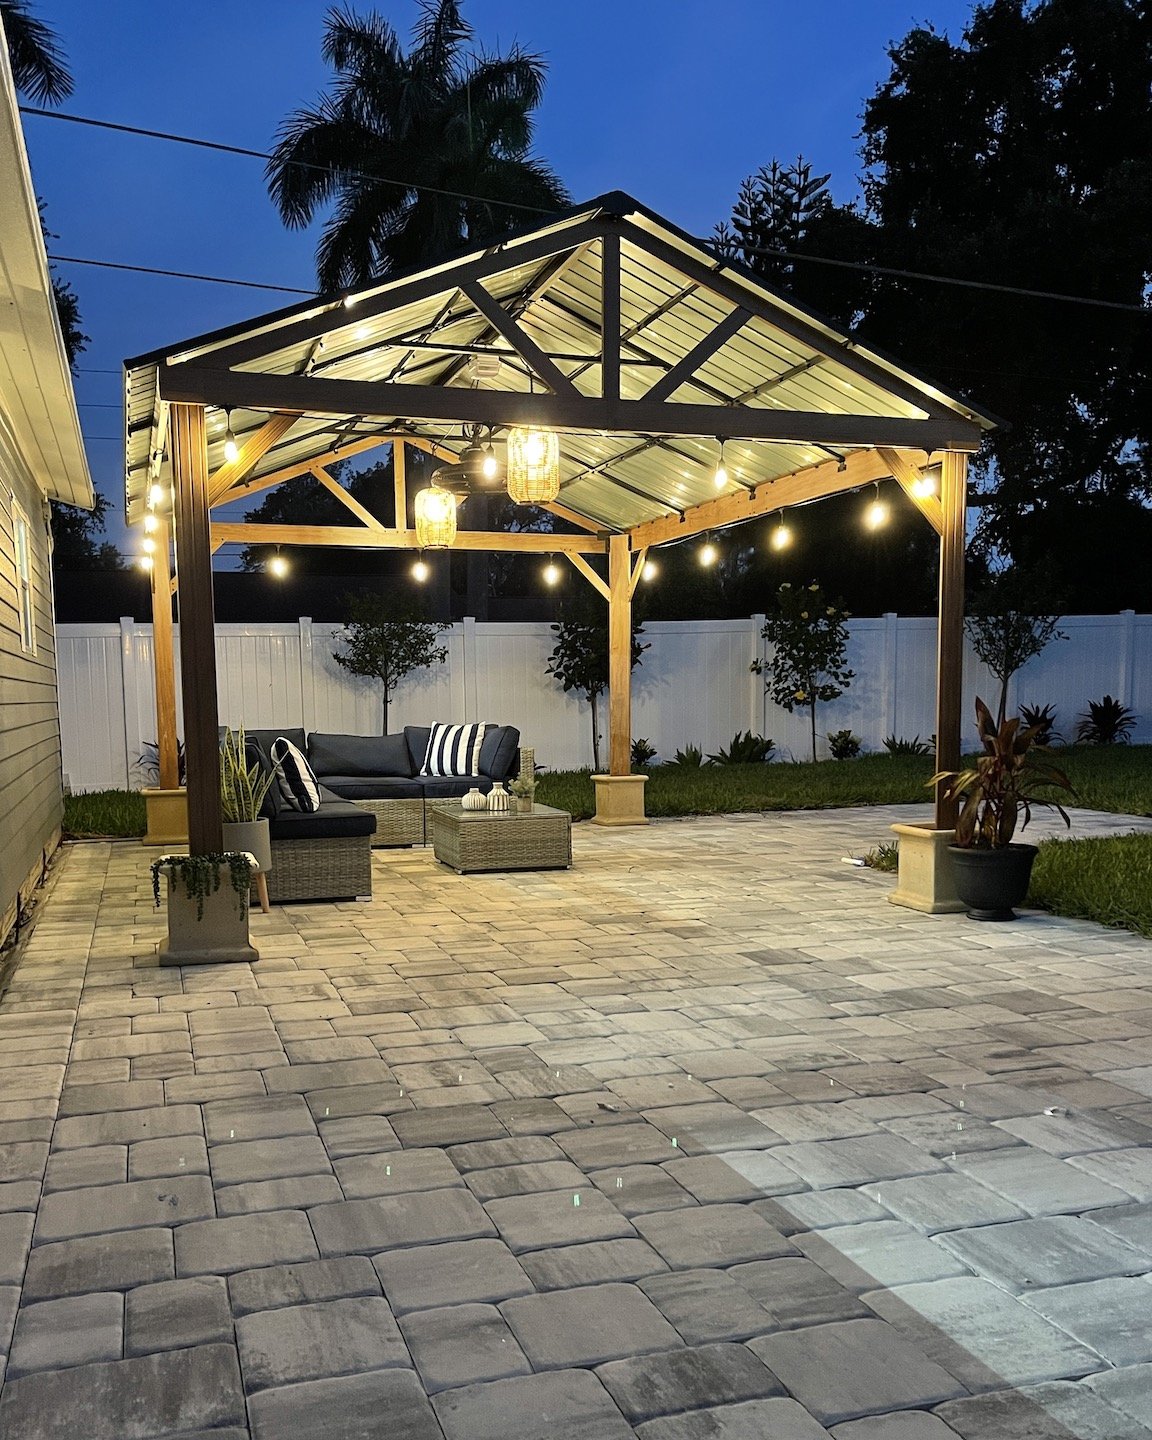 Secure Your Gazebo: Anchoring Tips for Pavers